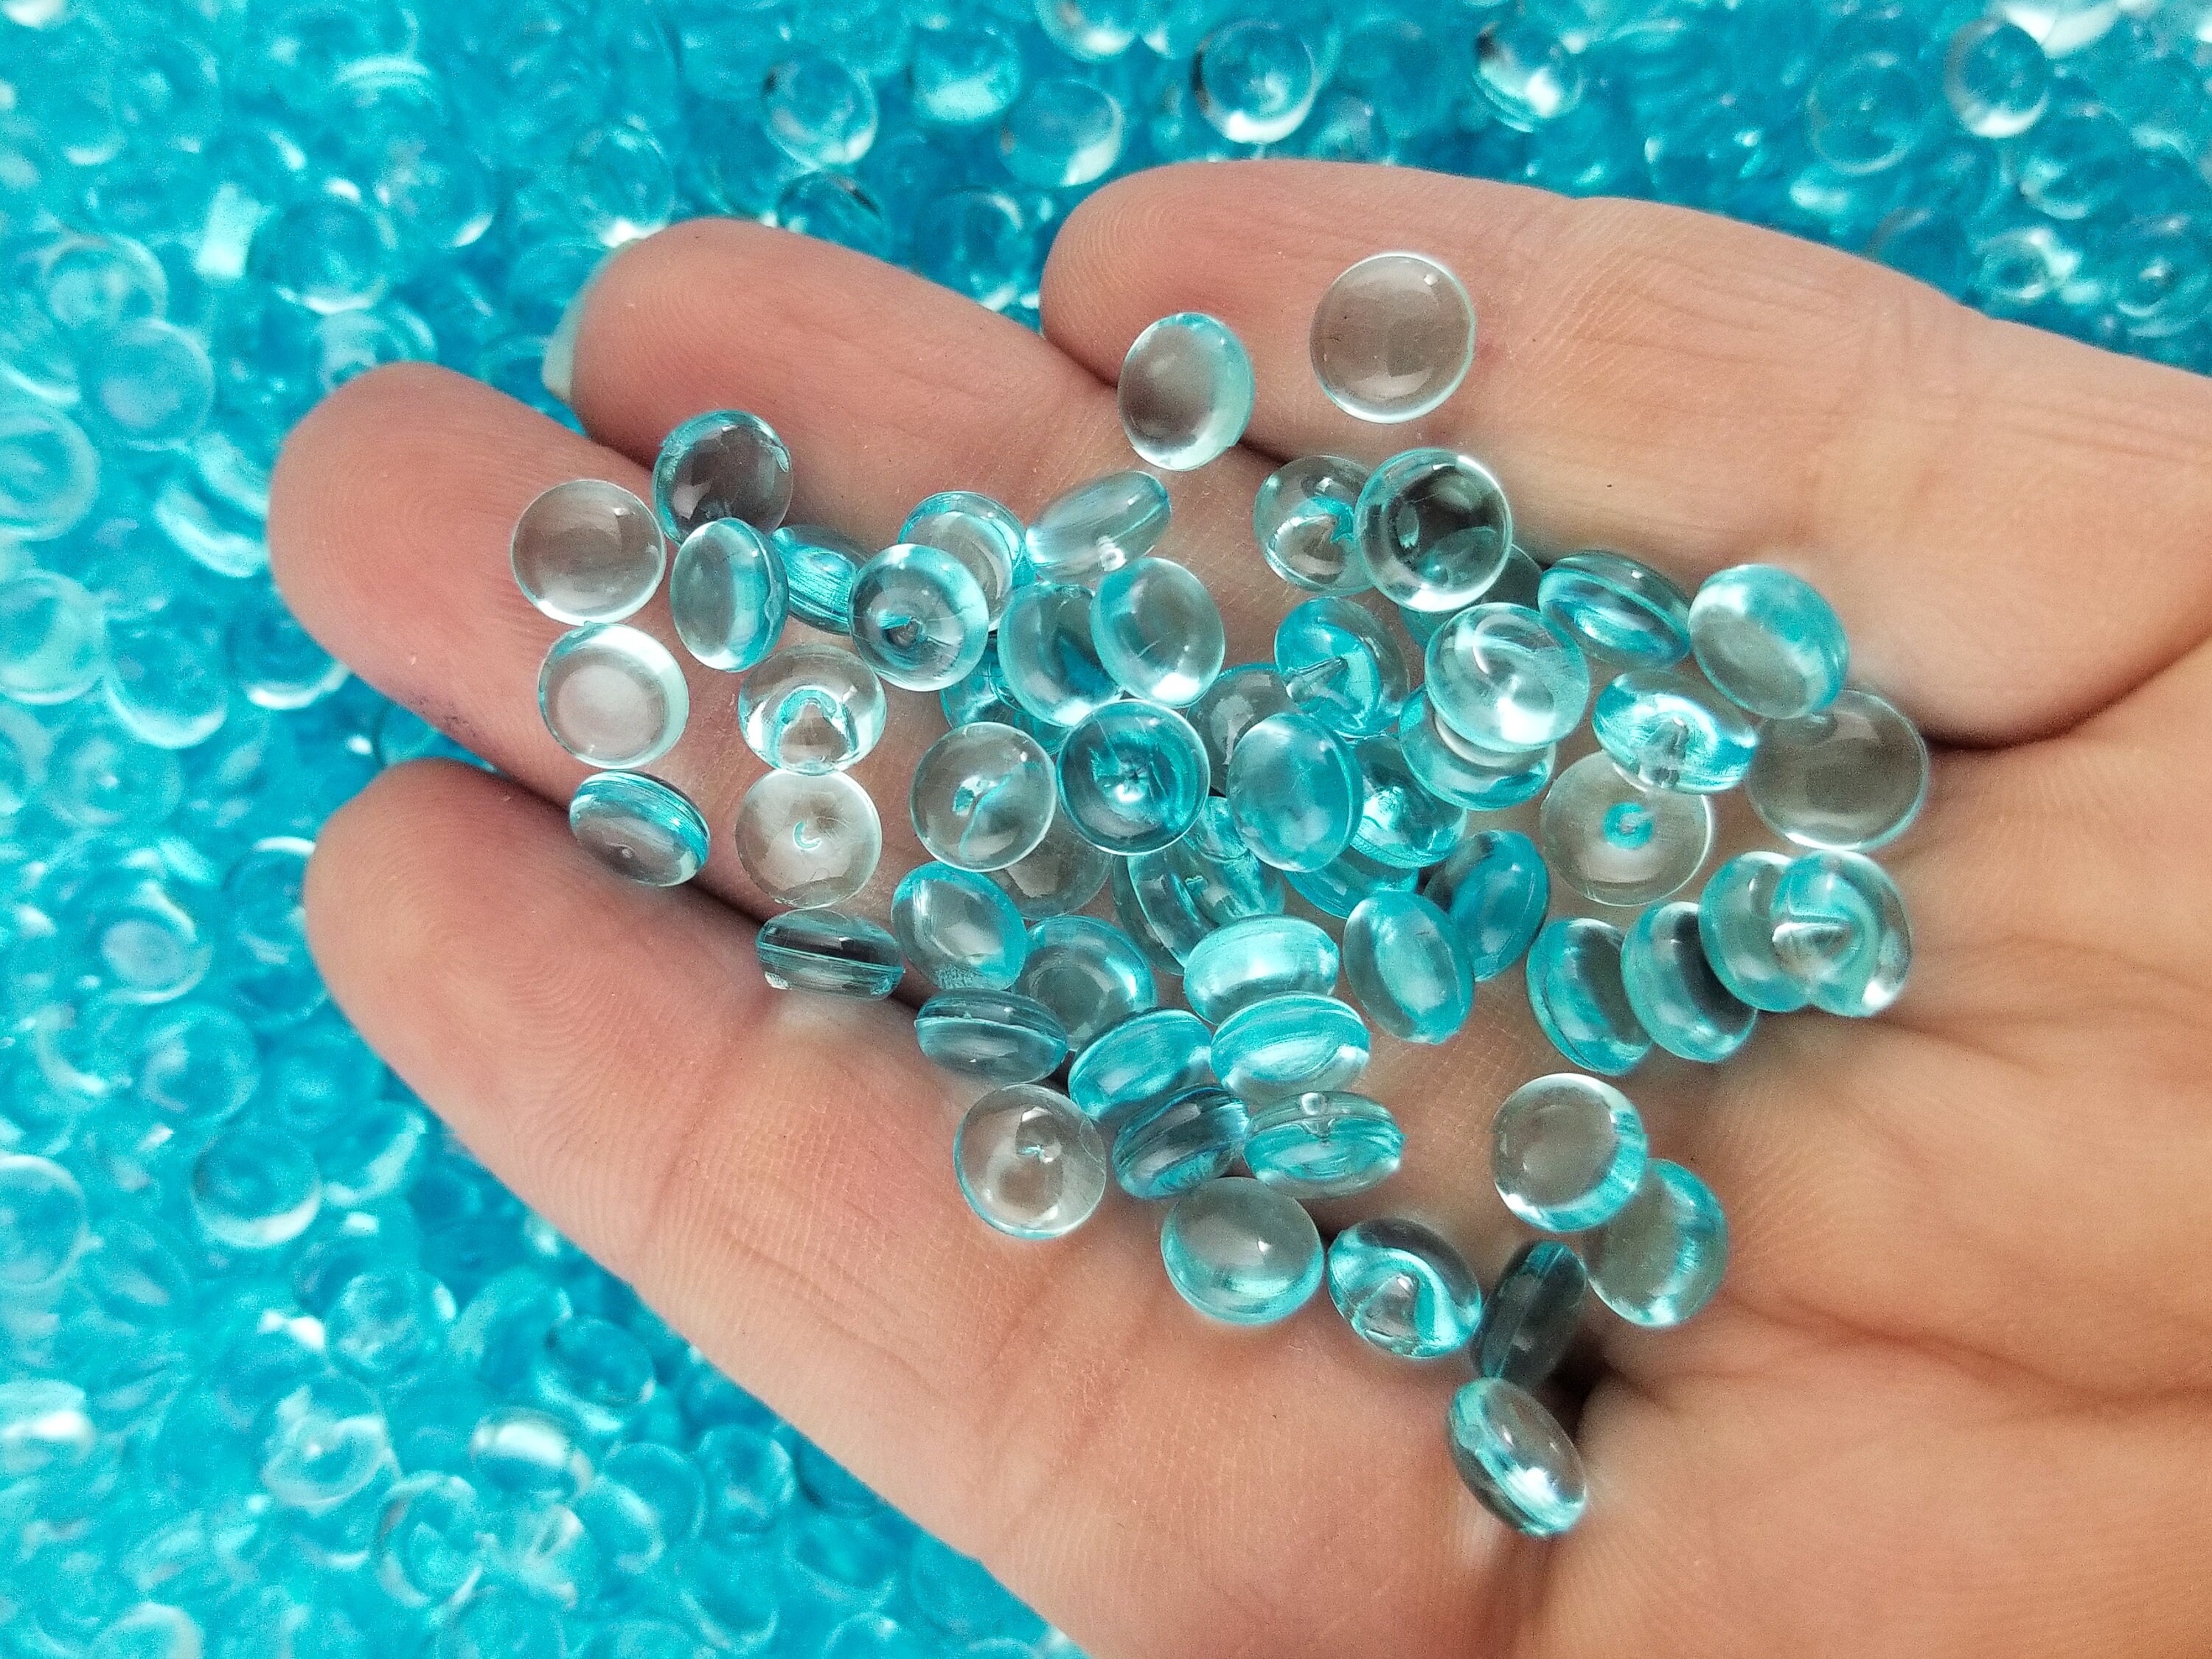 100 Gram 3 1/2 Ounces Ocean Blue Fishbowl Slushie Beads for Crunchy Slime  and Crafting 